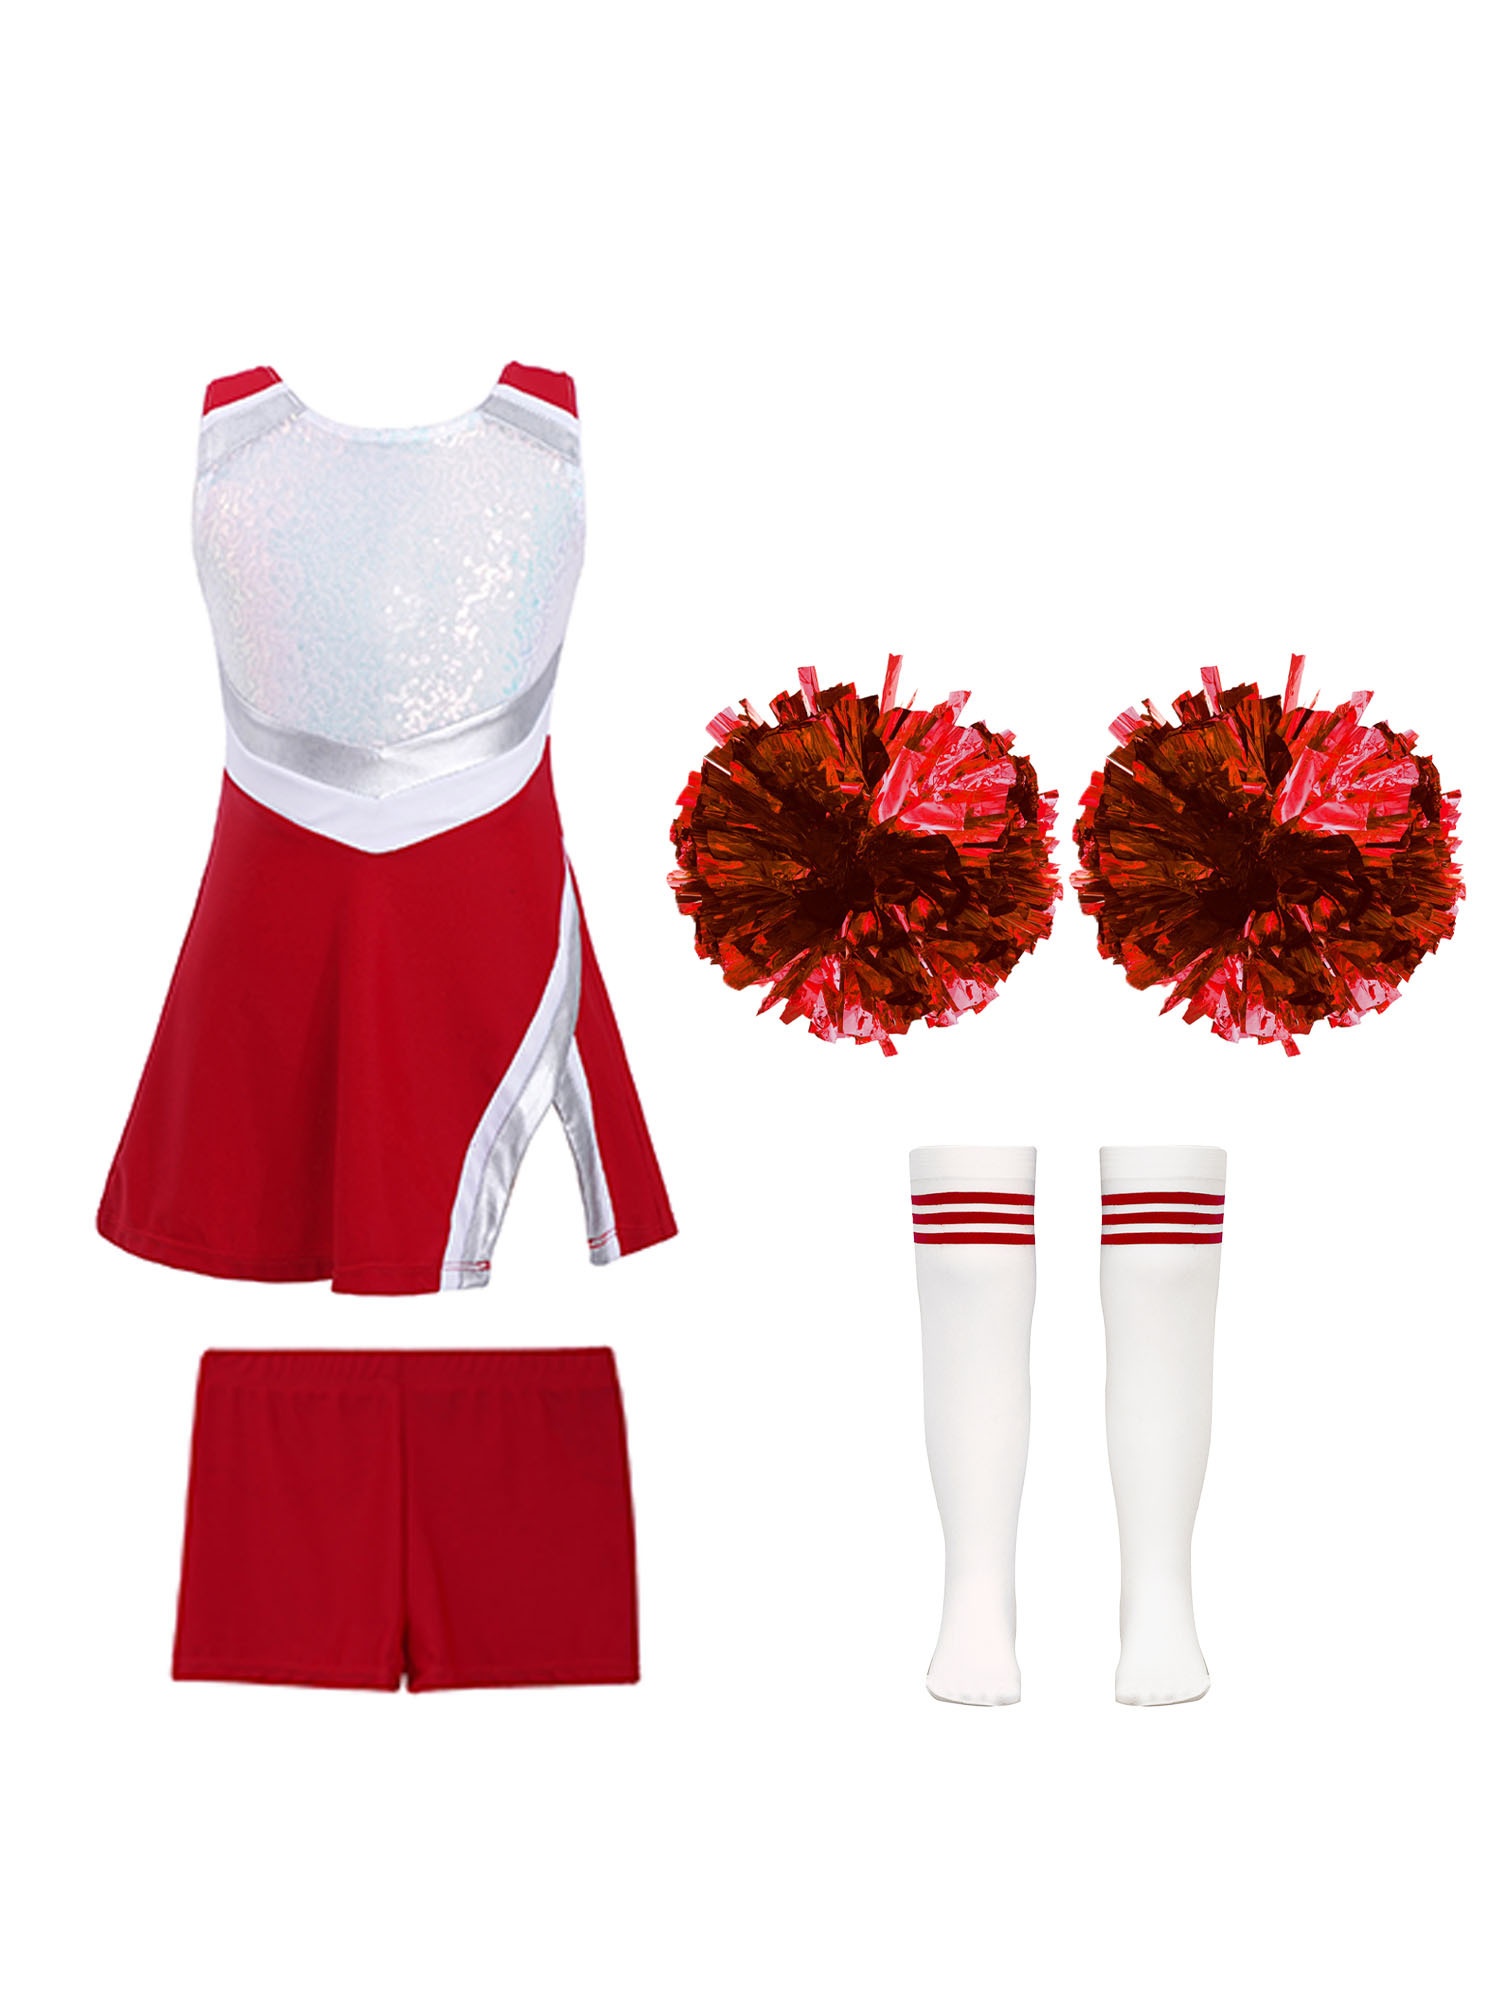 TiaoBug Kids Girls Cheer Leader Uniform Sports Games Cheerleading Dance Outfits Halloween Carnival Fancy Dress Up A Red-A 14 - image 1 of 5